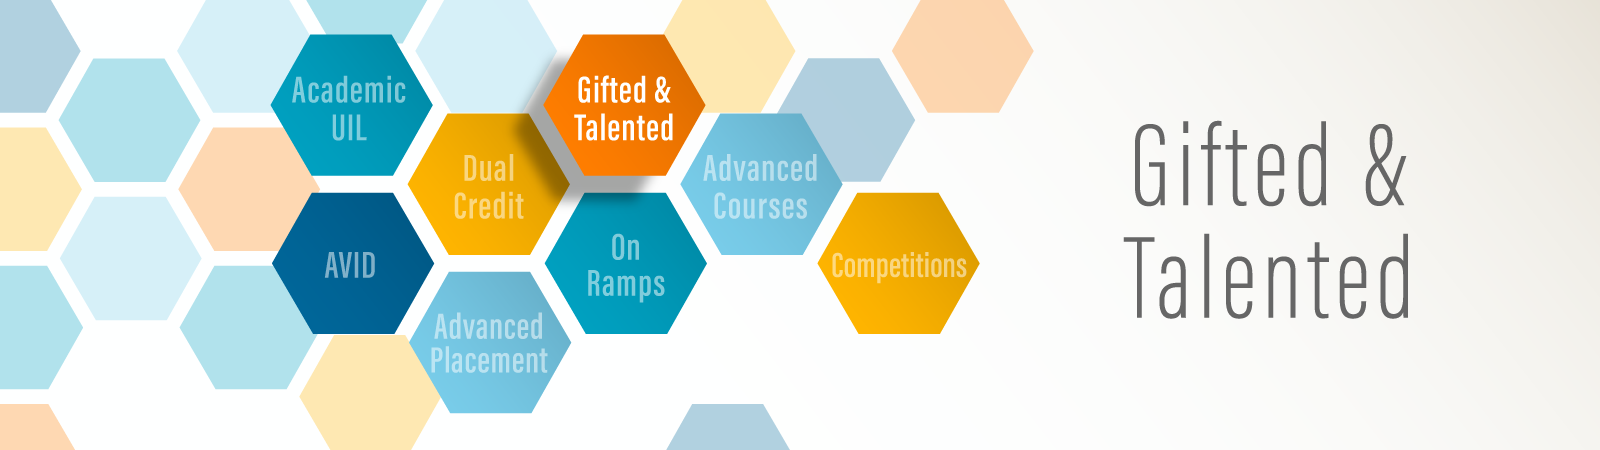 banner for gifted and talented program